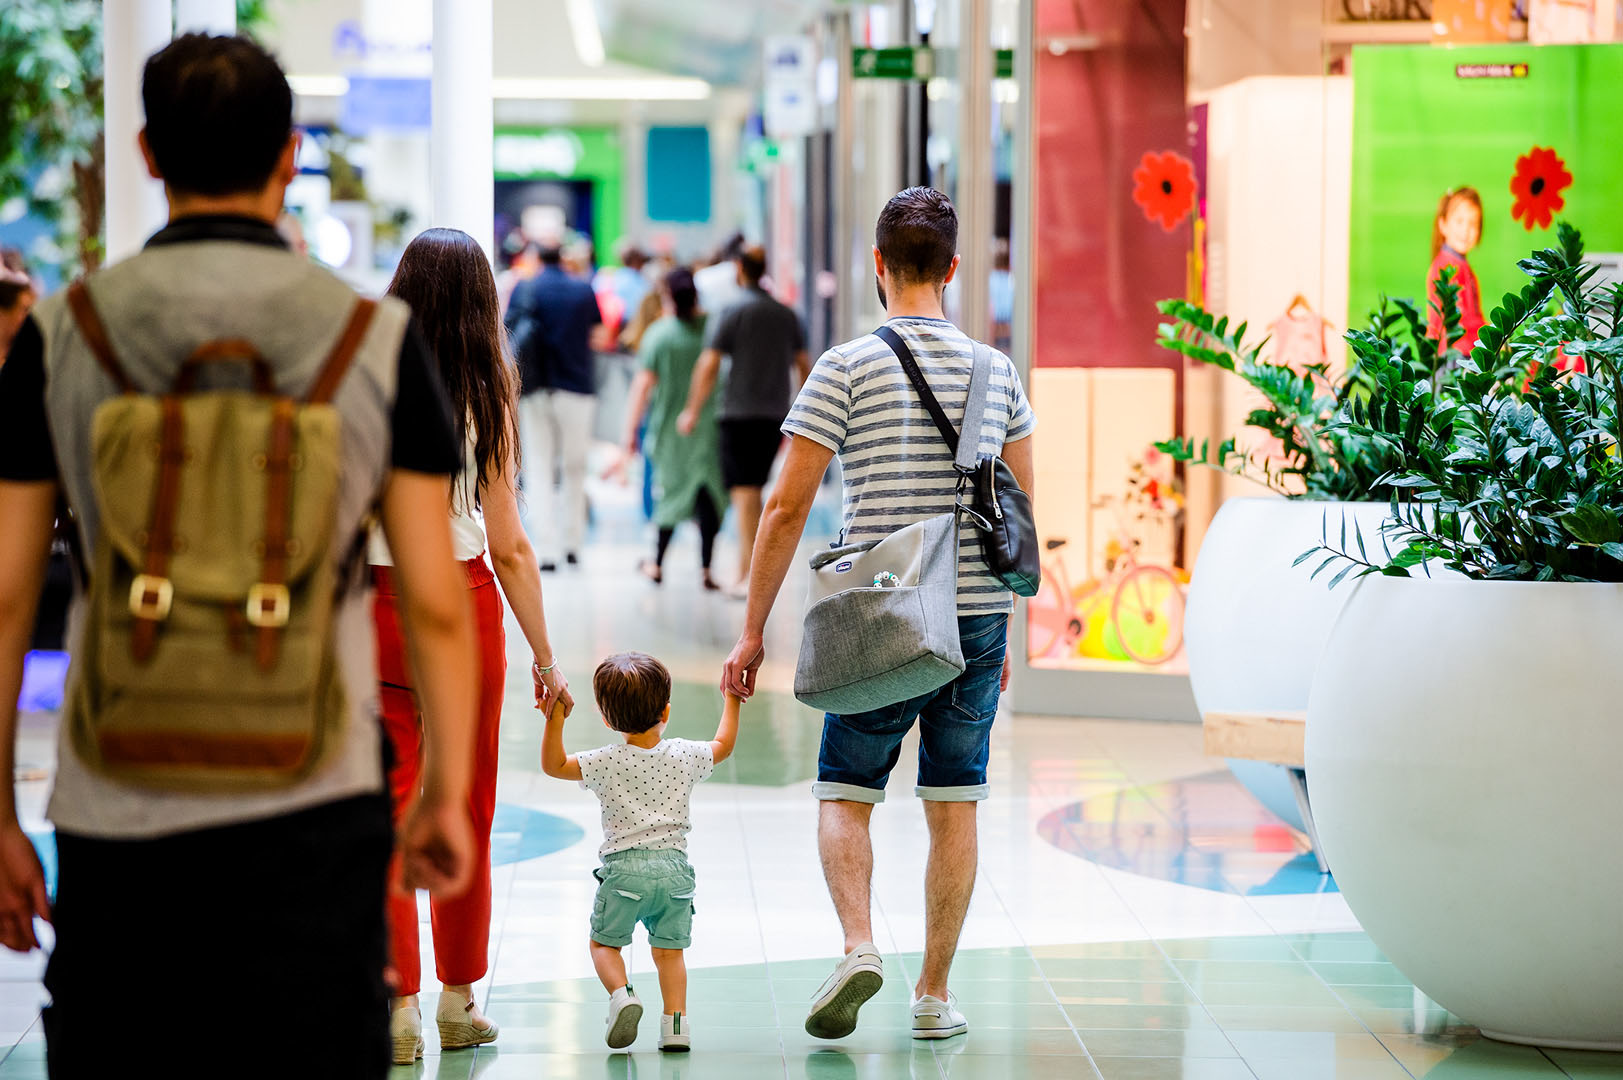 Mum & Dad holding hands with toddler shot from behind in busy shopping centre